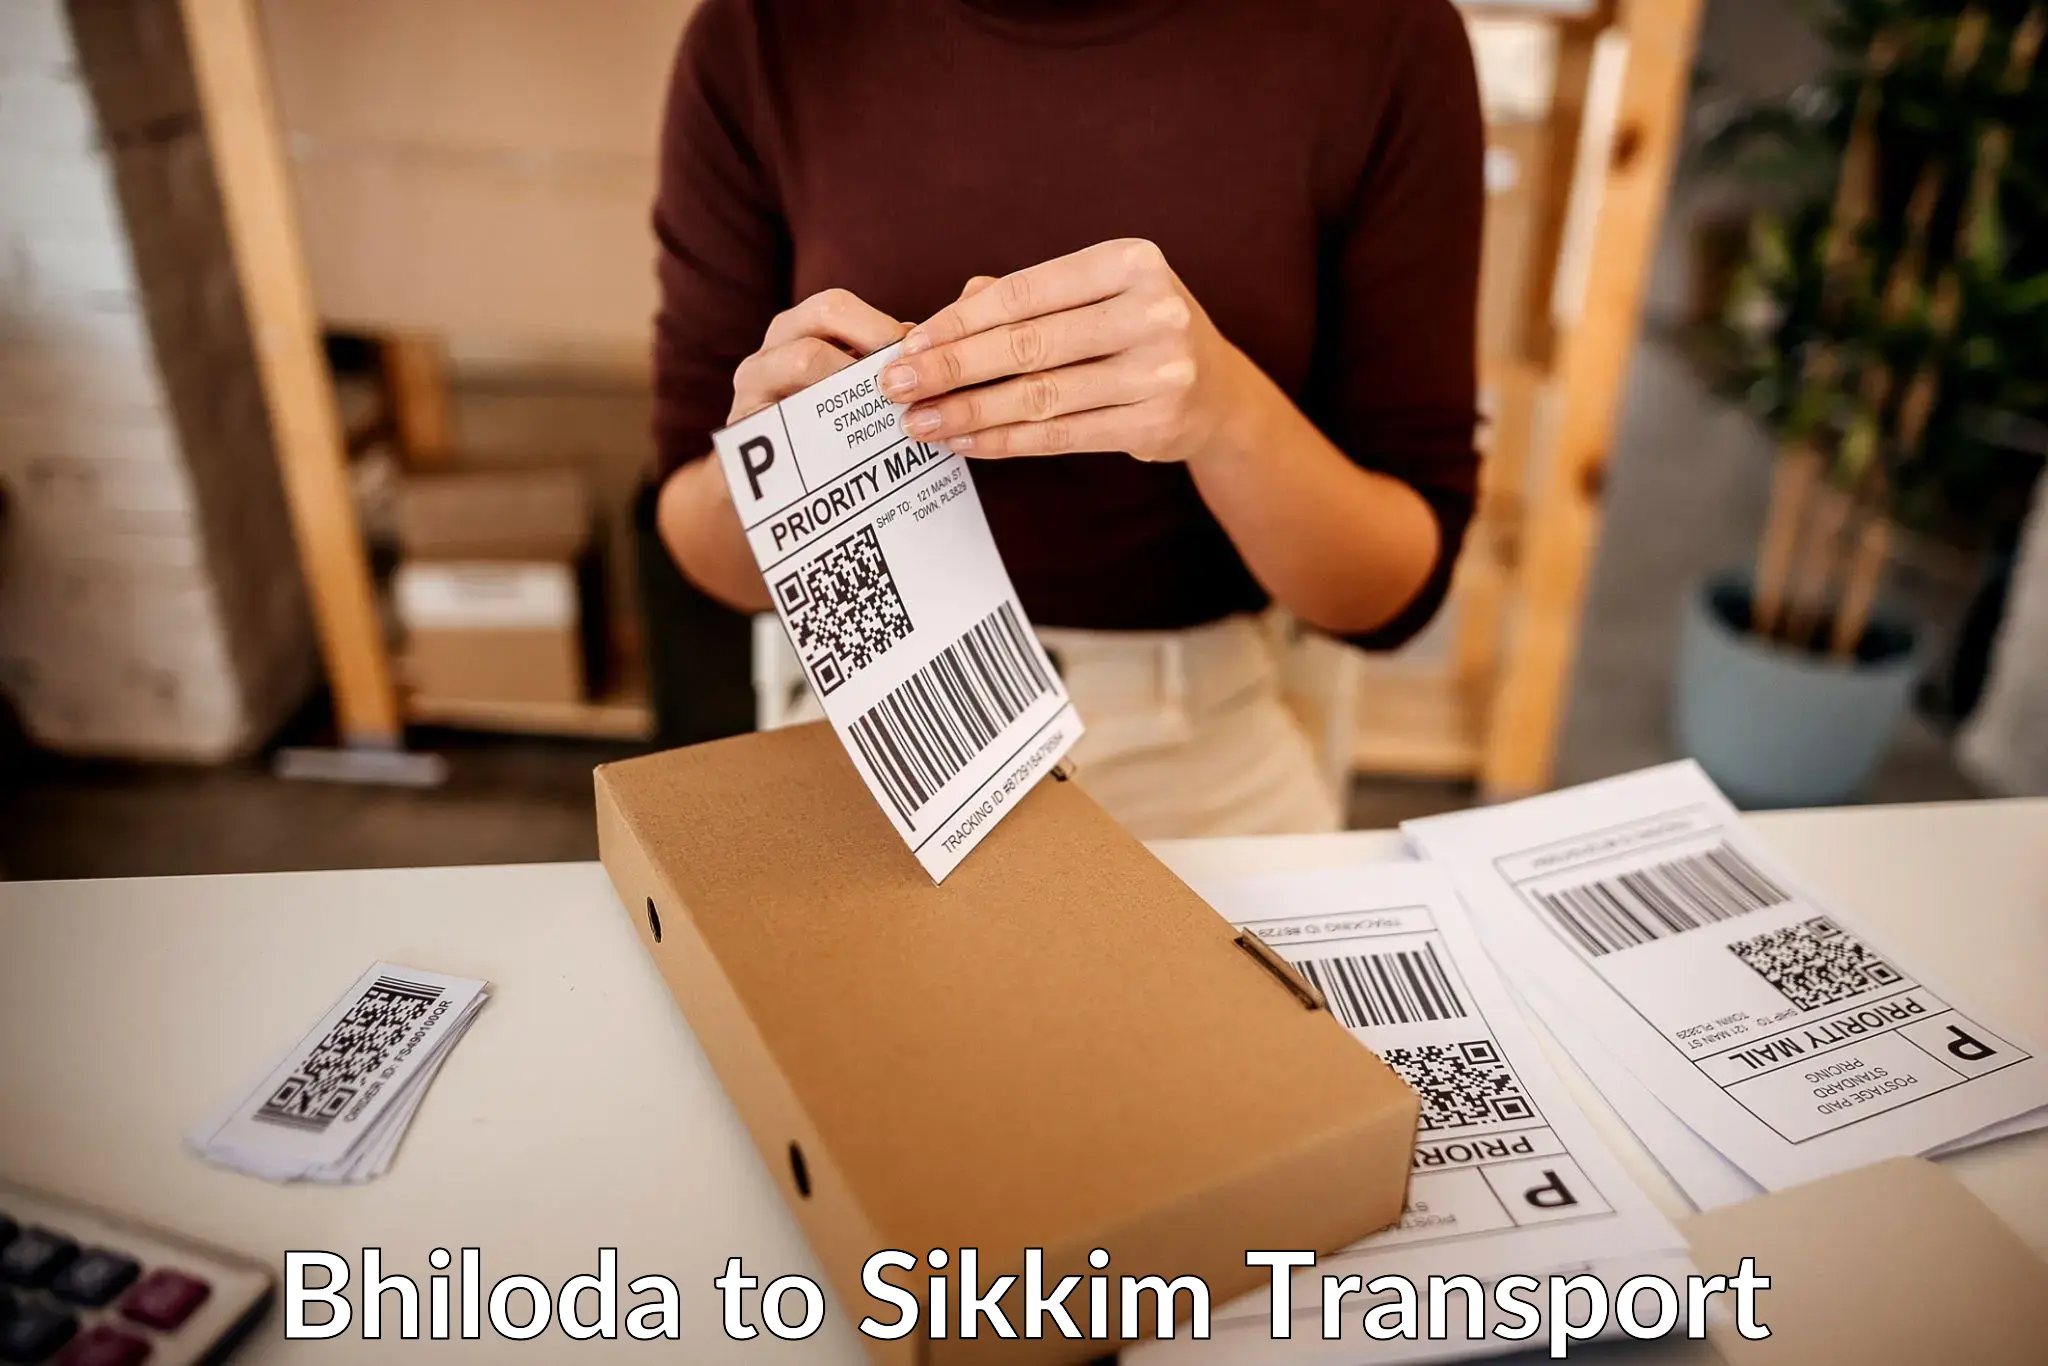 Truck transport companies in India Bhiloda to North Sikkim